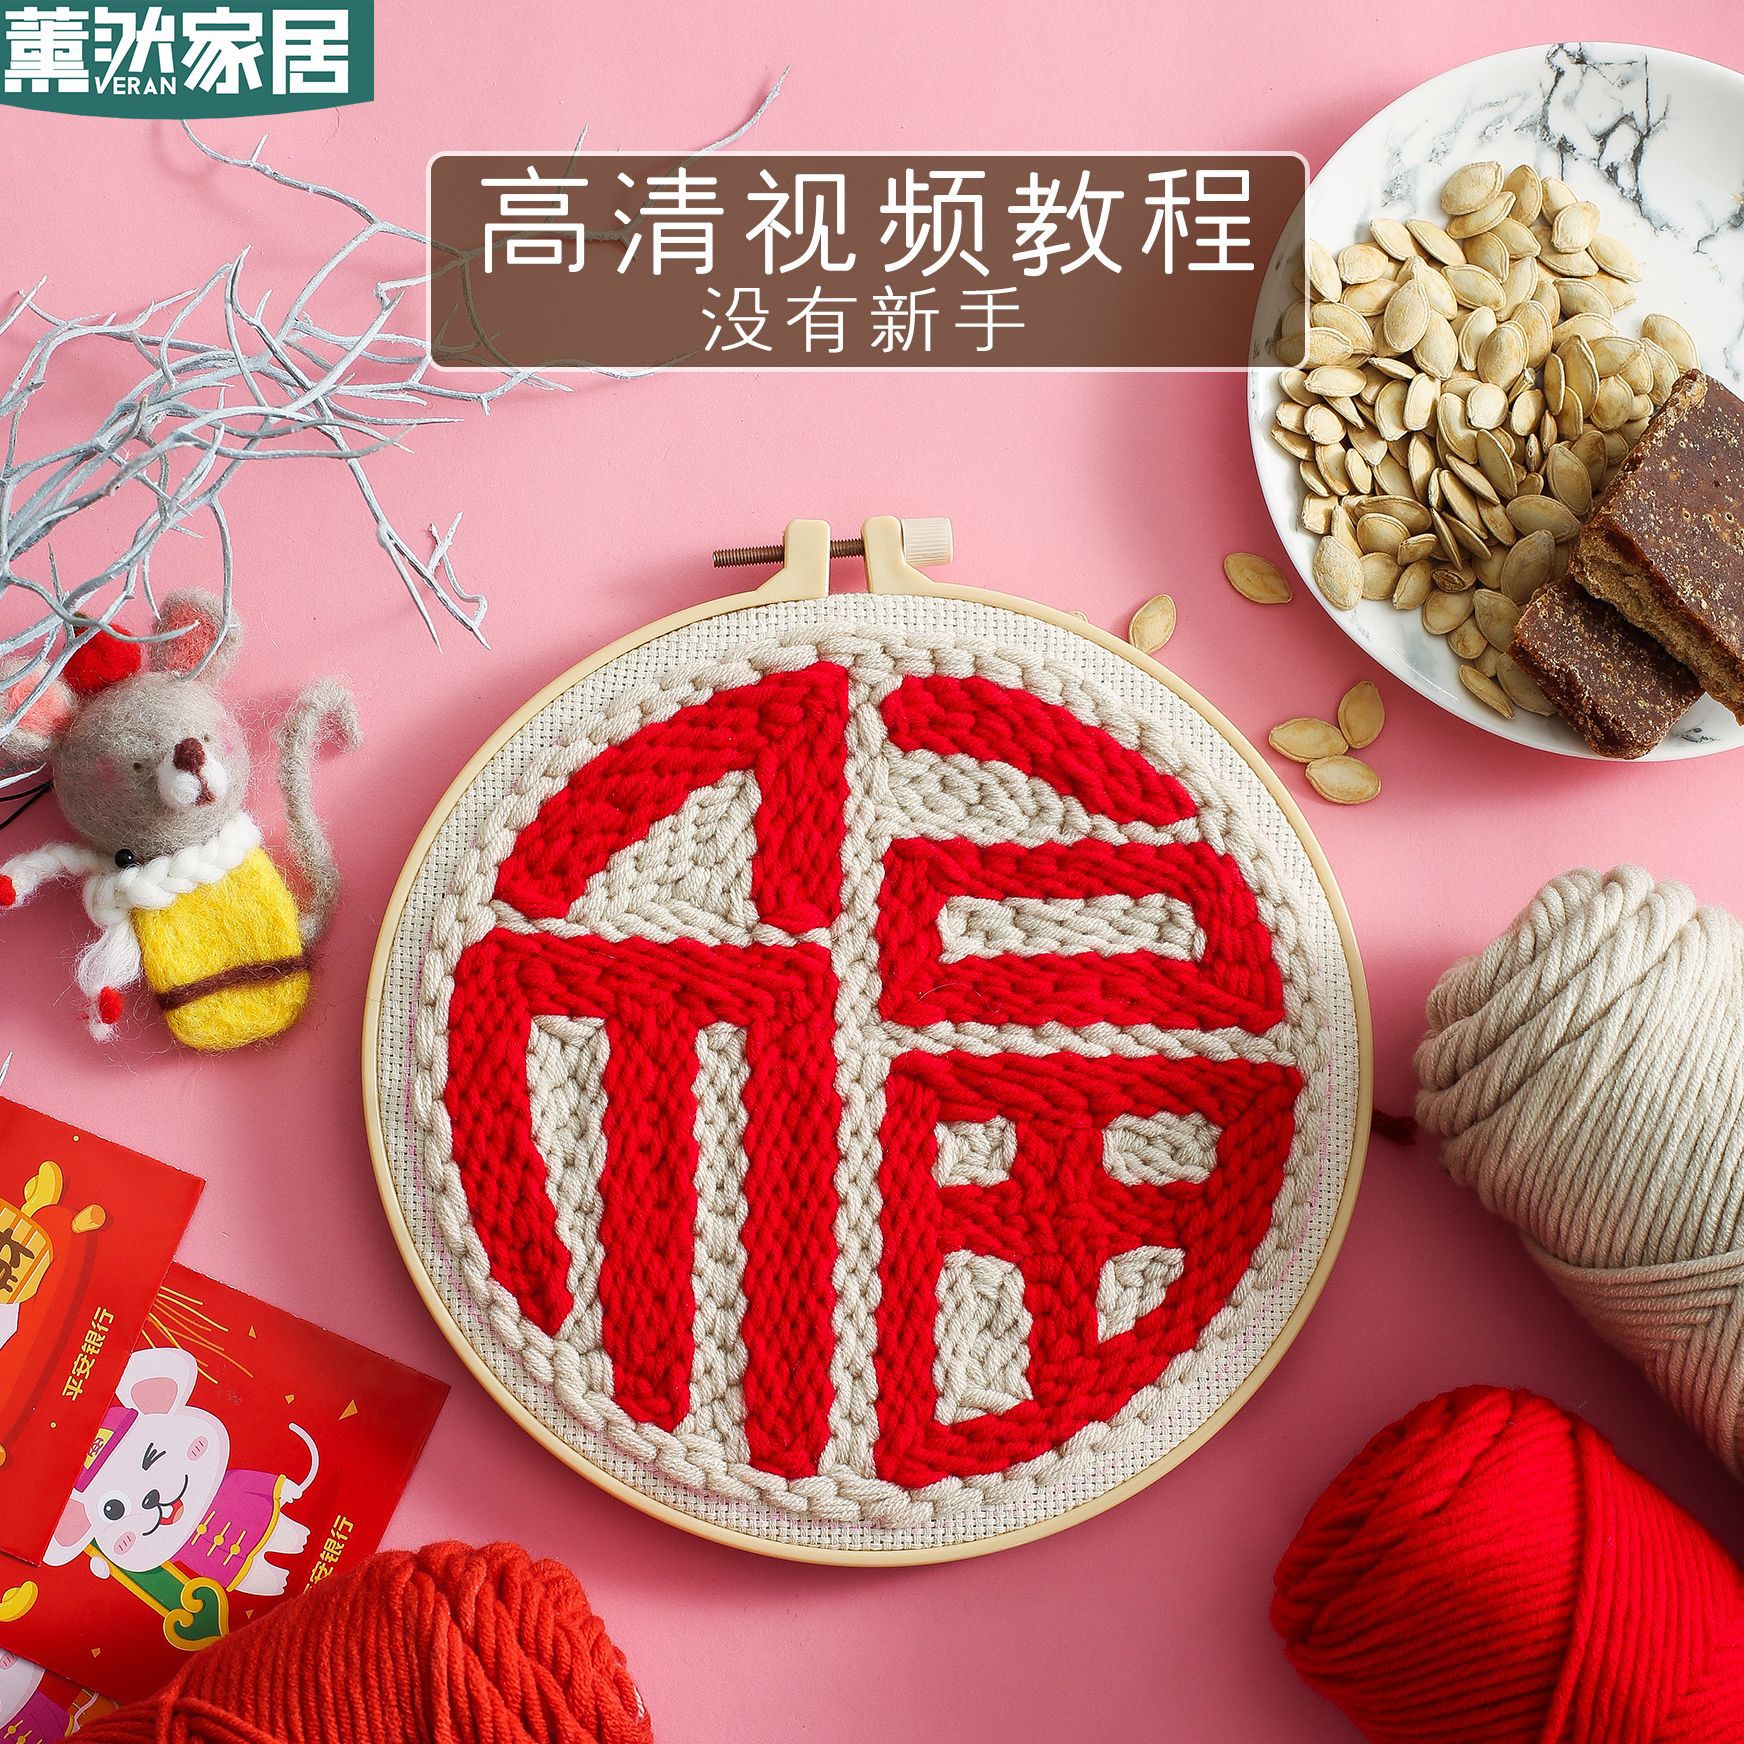 Spring Festival Fu Character Poke Embroidery Rubbing Show Handmade Embroidery Diy Material Package Needle Embroidery Tool Wool Poke Xw007